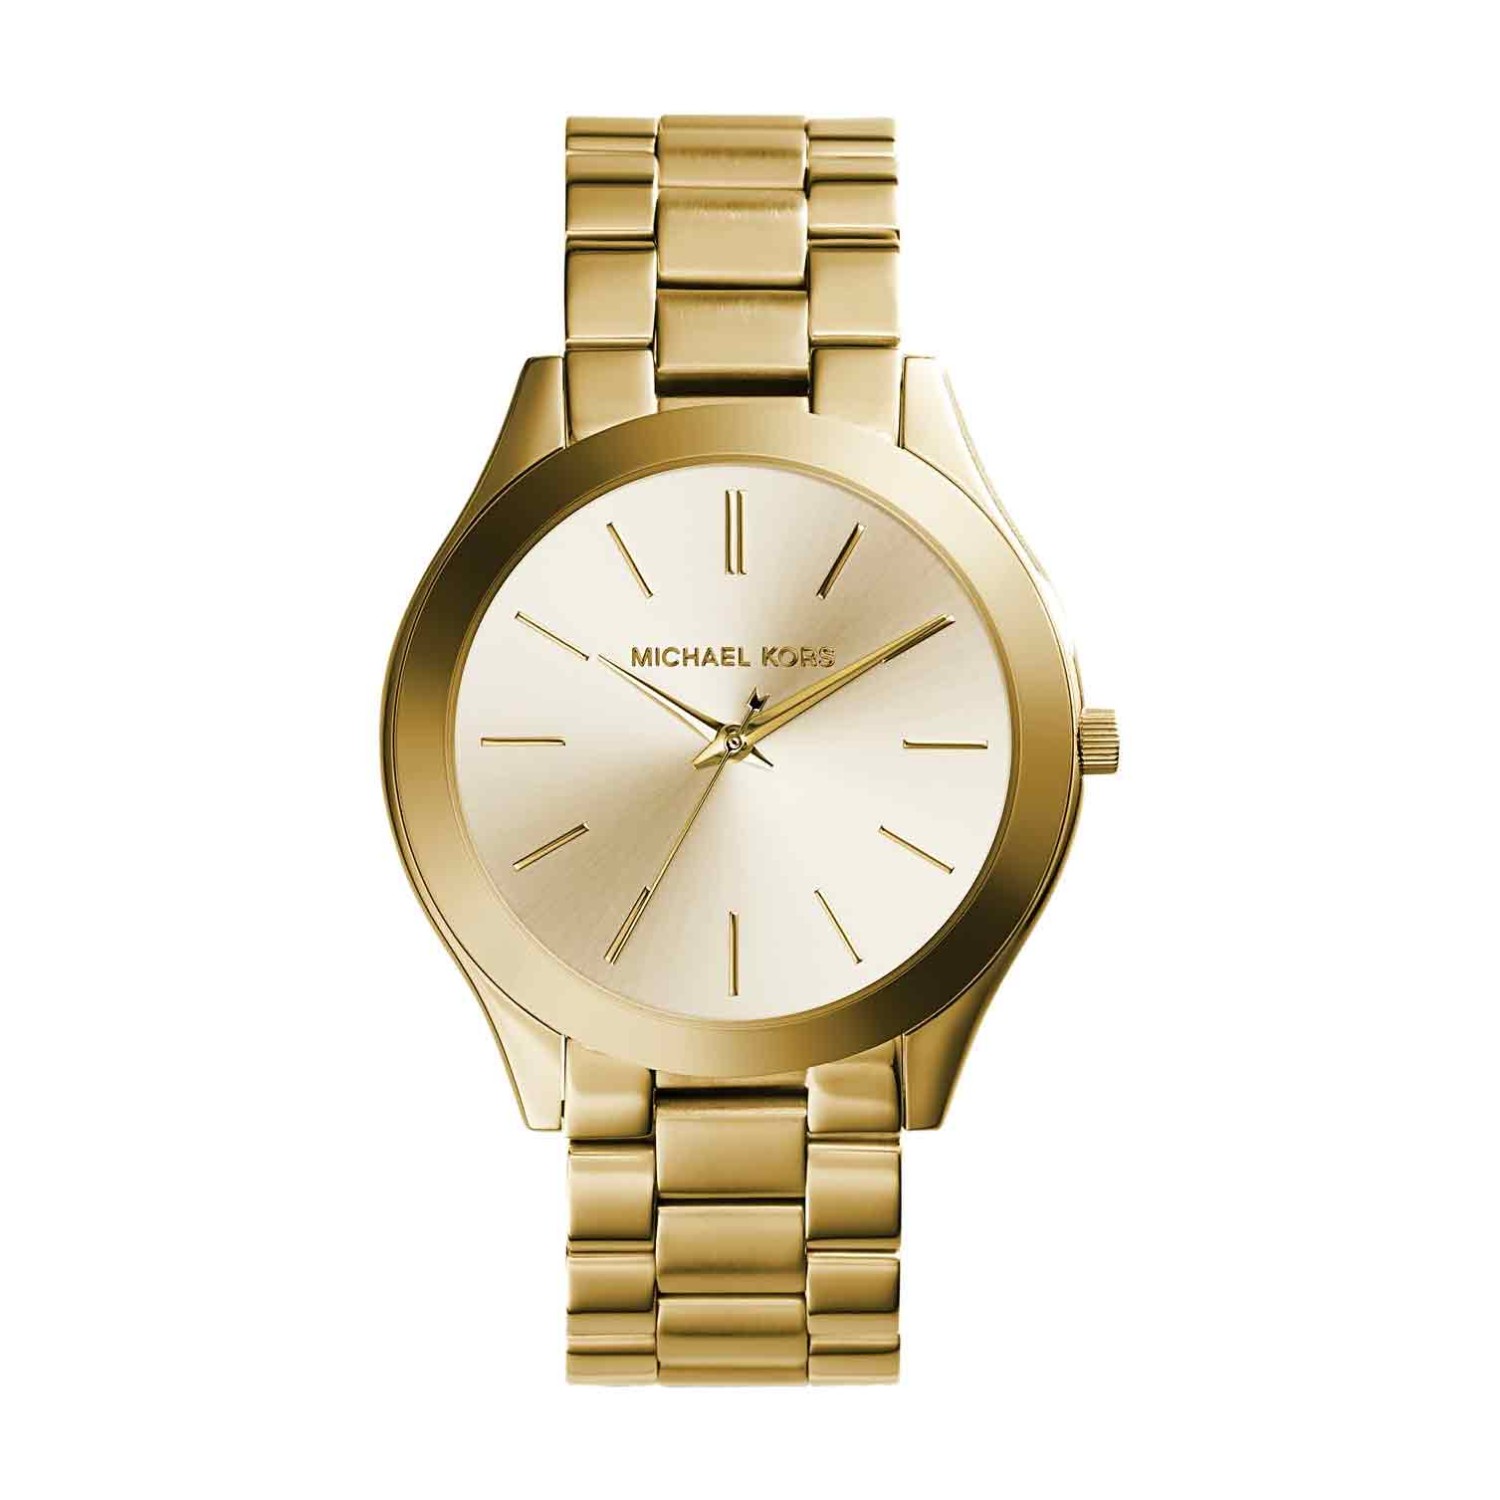 MK3179 Michael Kors Slim Runway Gold Tone Watch.   A perennial favorite, Michael Kors iconic Runway watch gets a slim update just in time for the holidays. We love how the sleek, understated dial reads modern, and in gold-tone stainless steel, easily adds